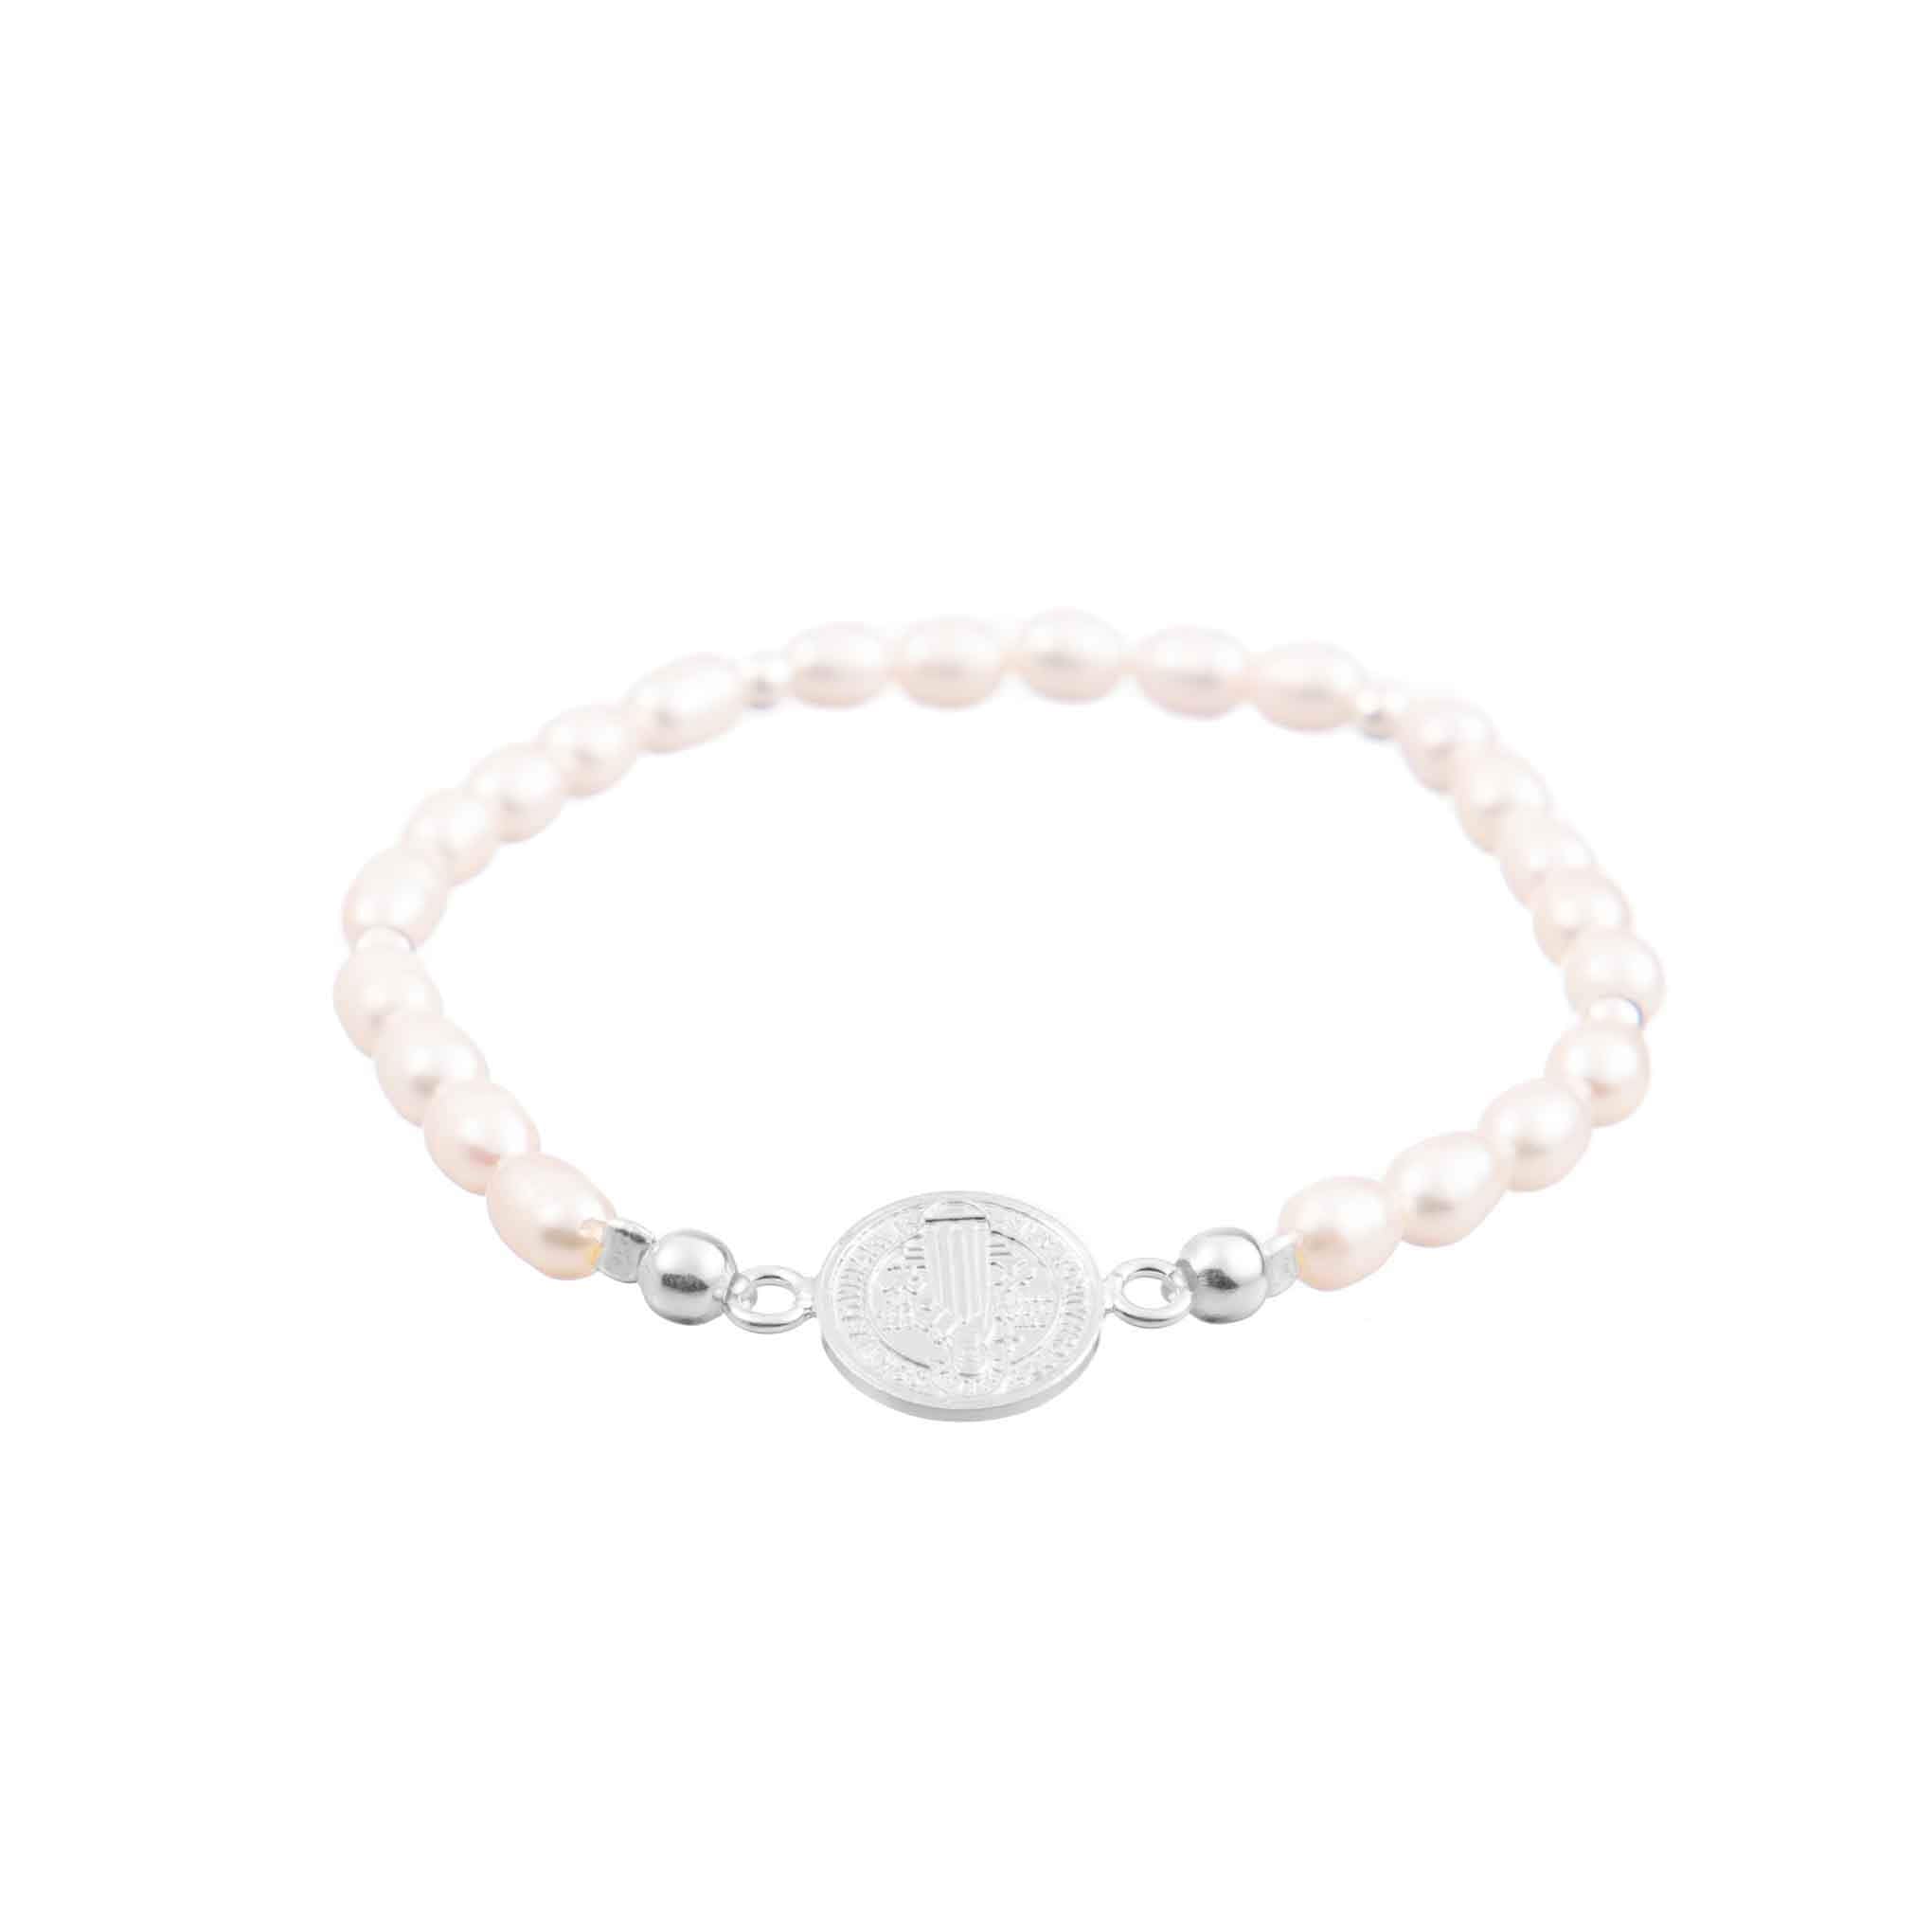 Pearl bracelet with silver St. Benedict charm